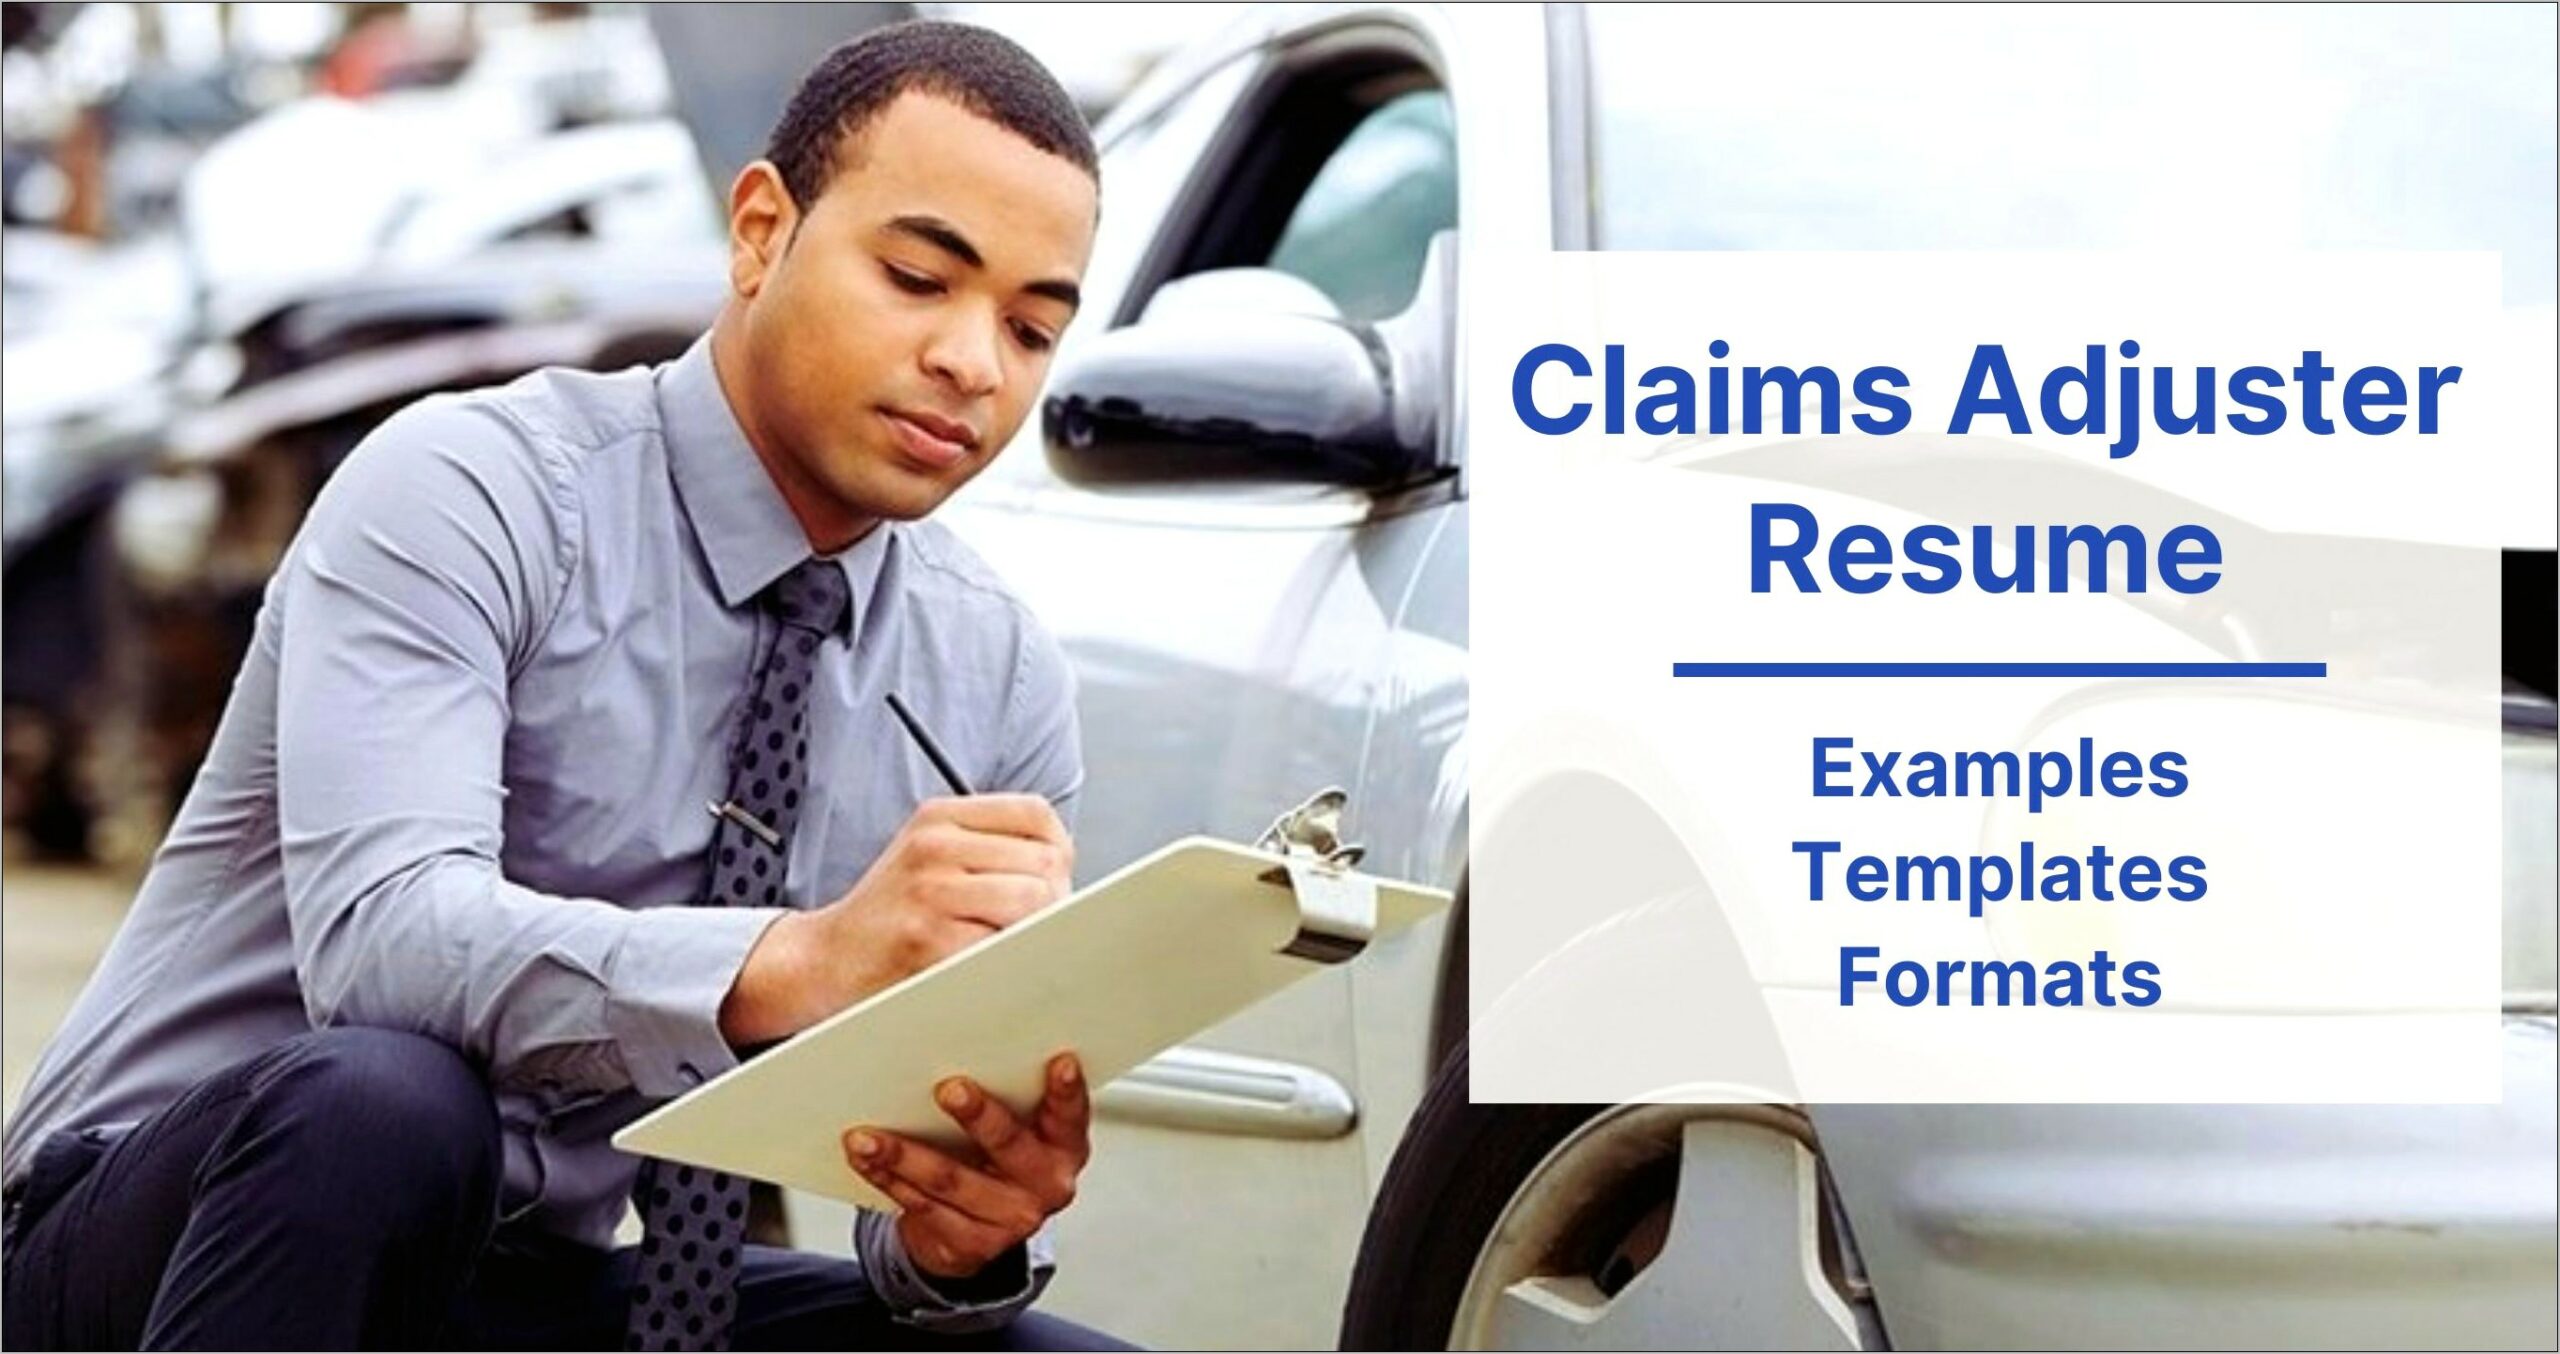 Claims Adjuster Resume Objective Examples